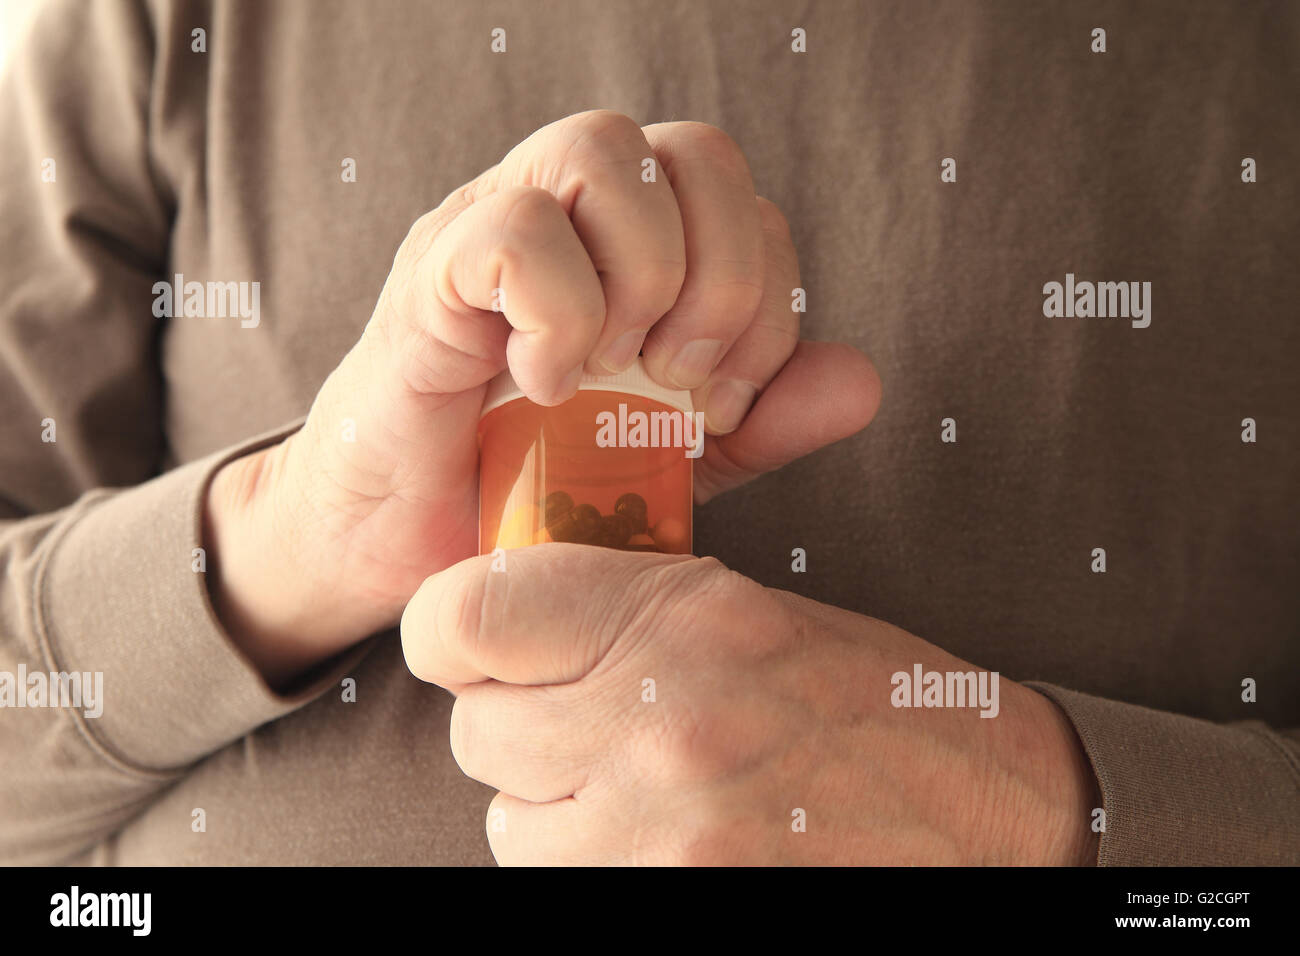 Older man struggles to get a container of capsules open. Stock Photo